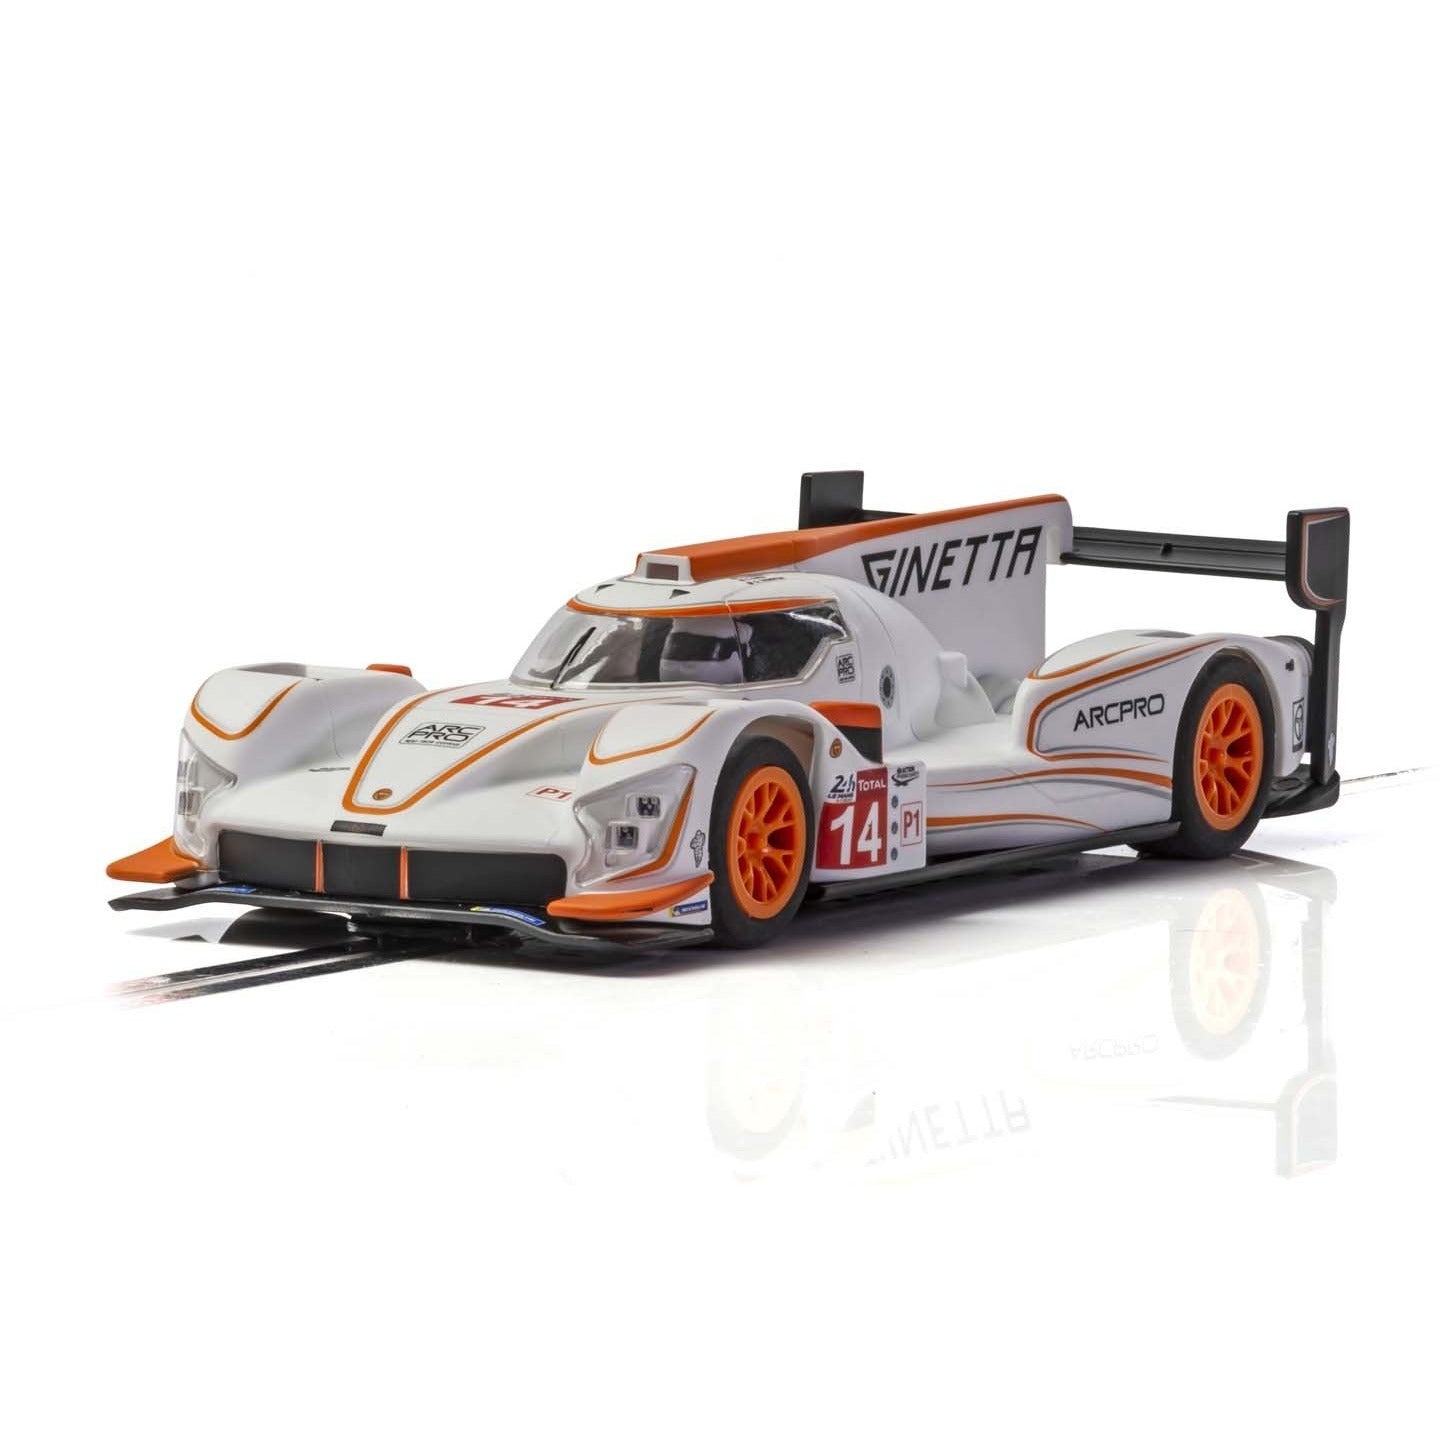 Ginetta G60-LPT1 No.14 Slot Car by Scalextric